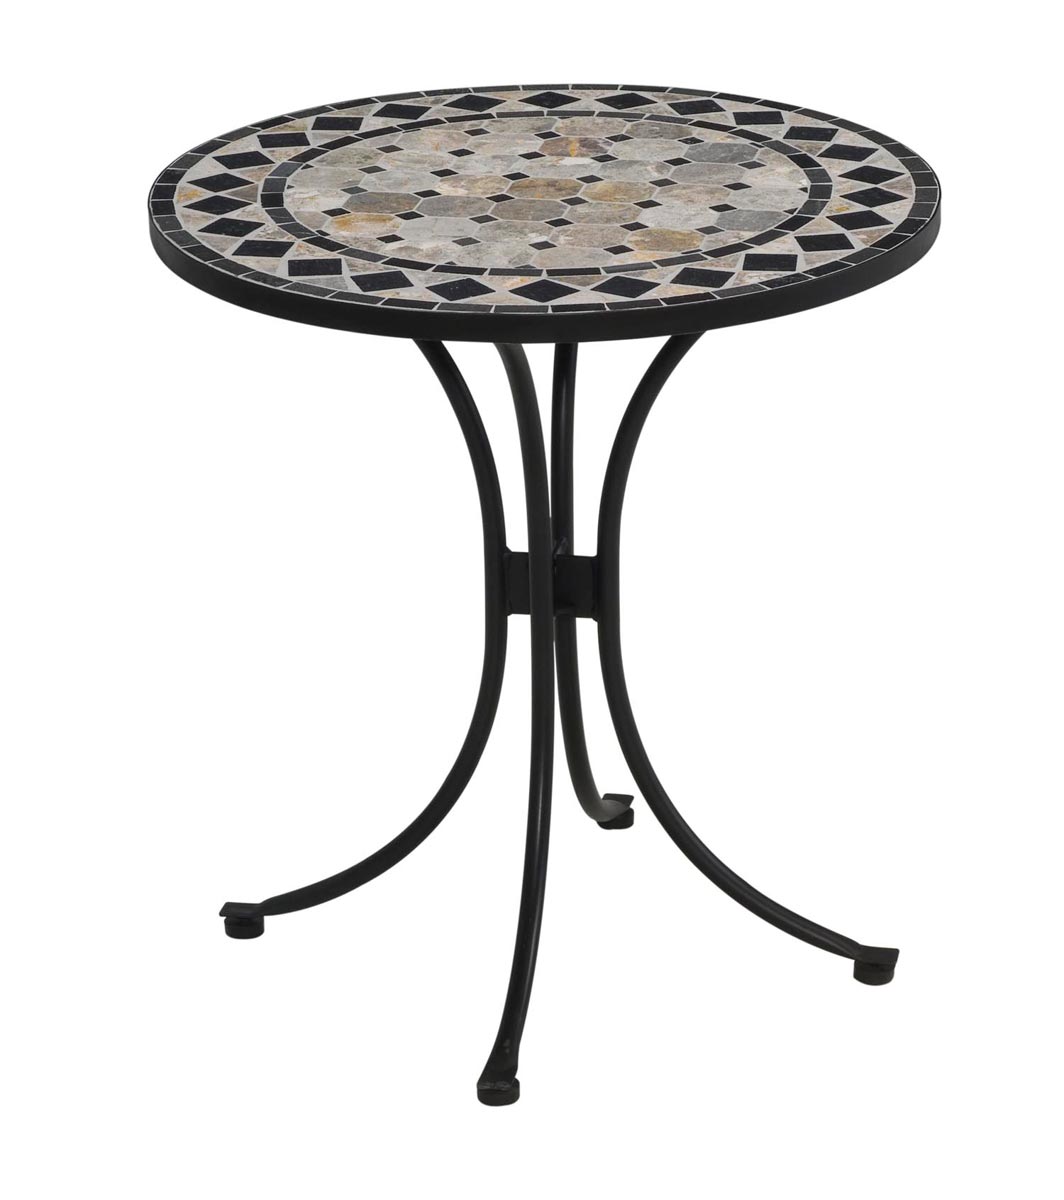 Home Styles Tile Top Bistro Table - Tan and Black